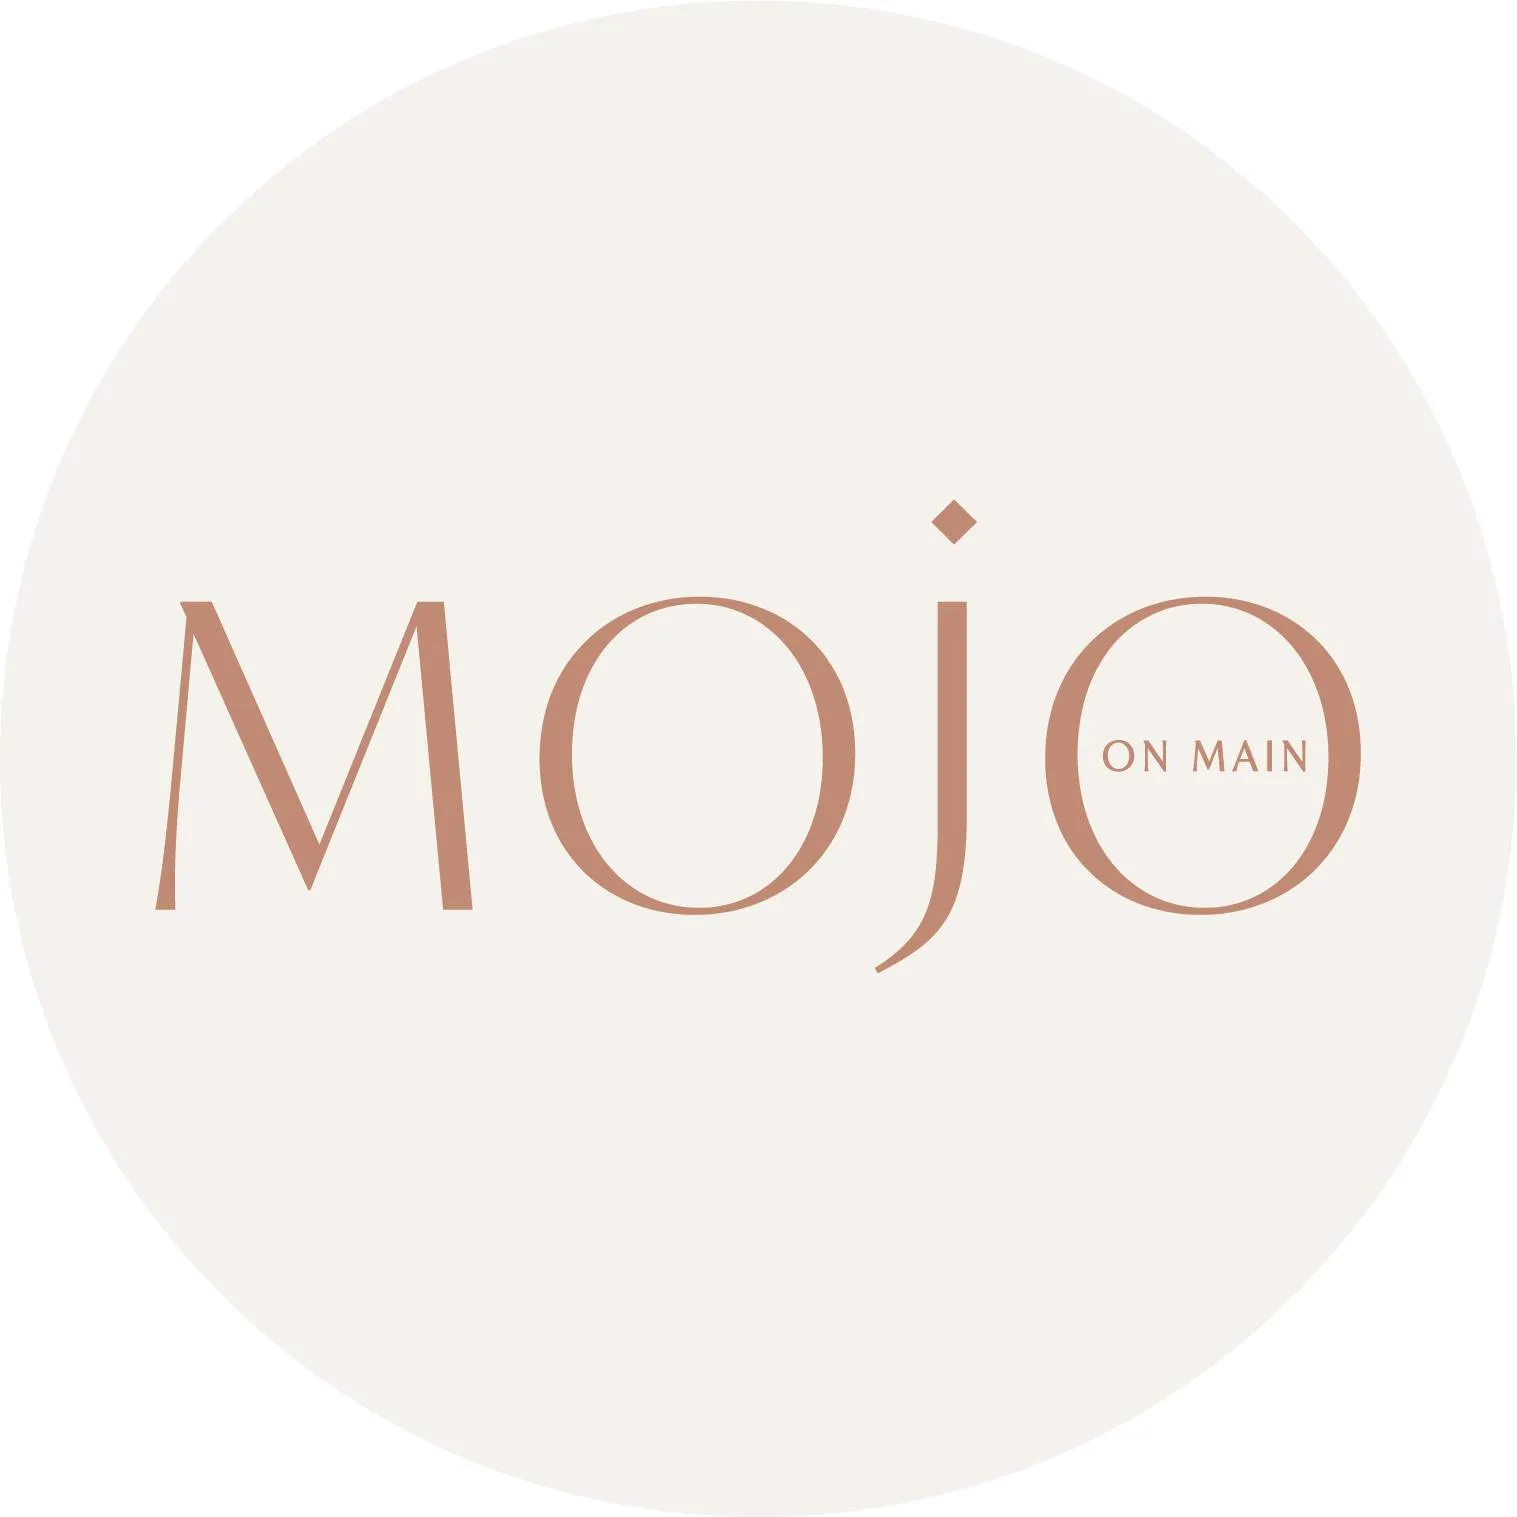  Mojo On Main promotions